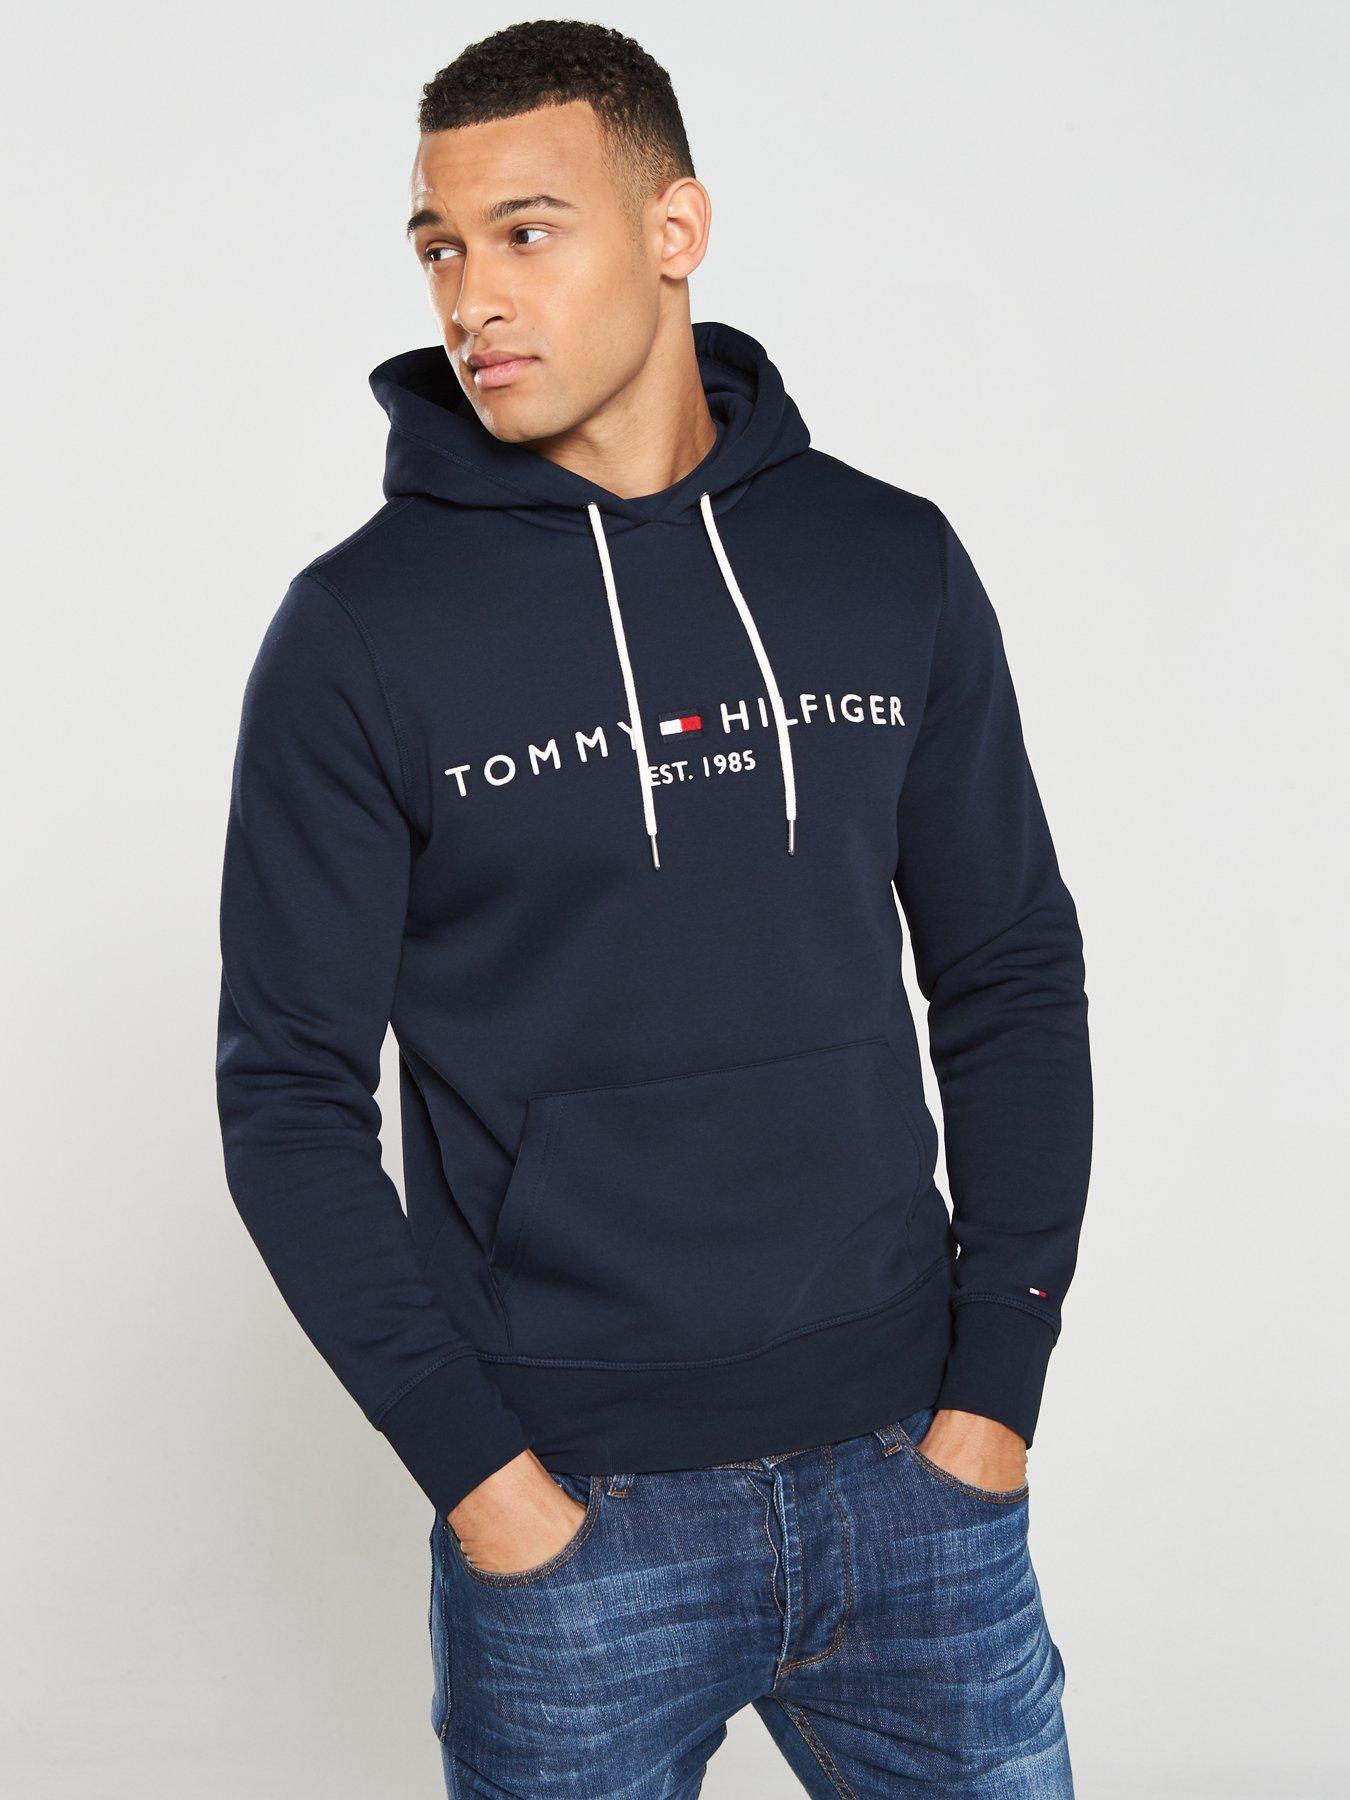 tommy hilfiger hoodie for mens